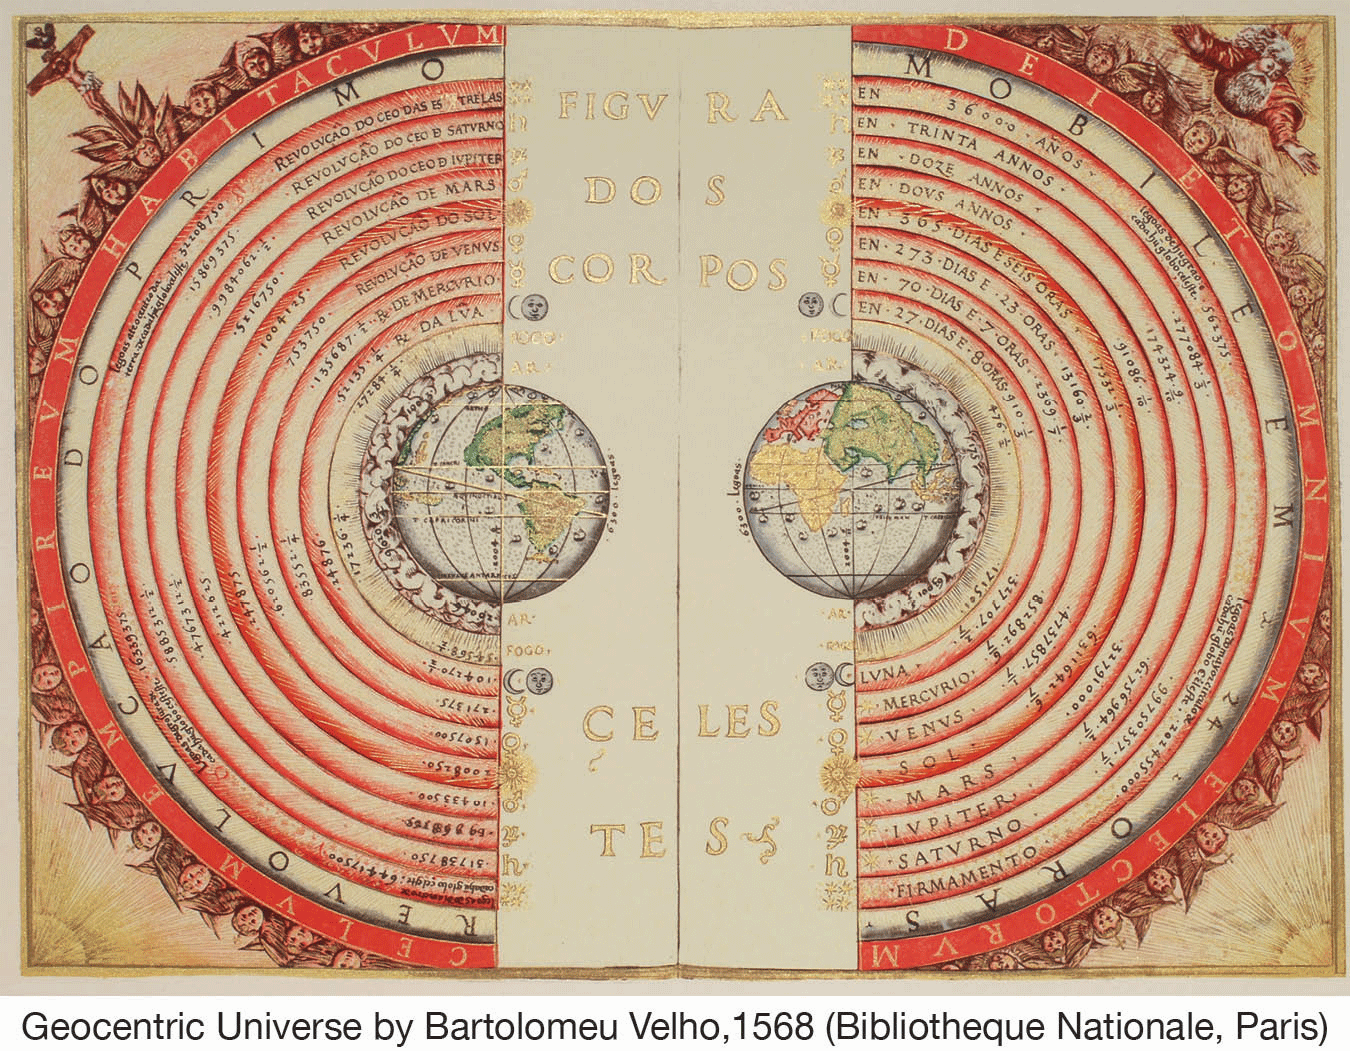 A 1568 picture of the universe--geocentric universe.